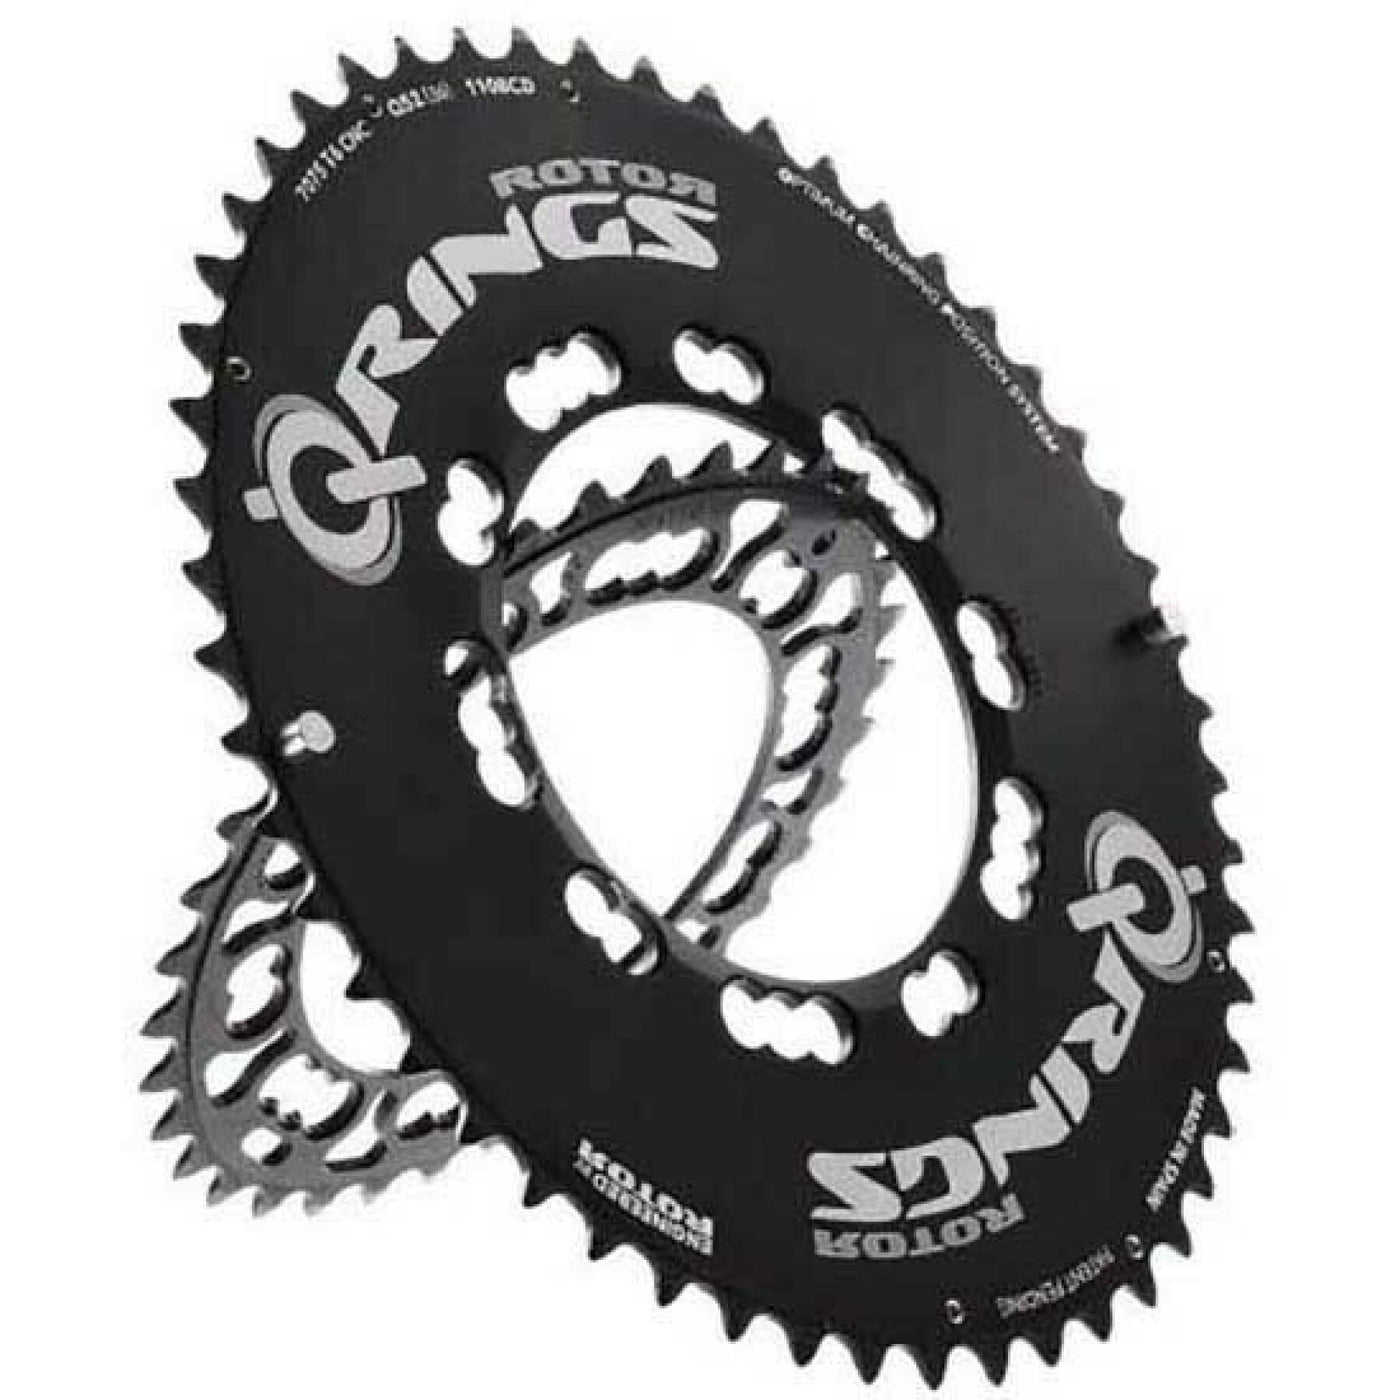 Rotor Q Rings 10/11 Speed Chainring (Black)